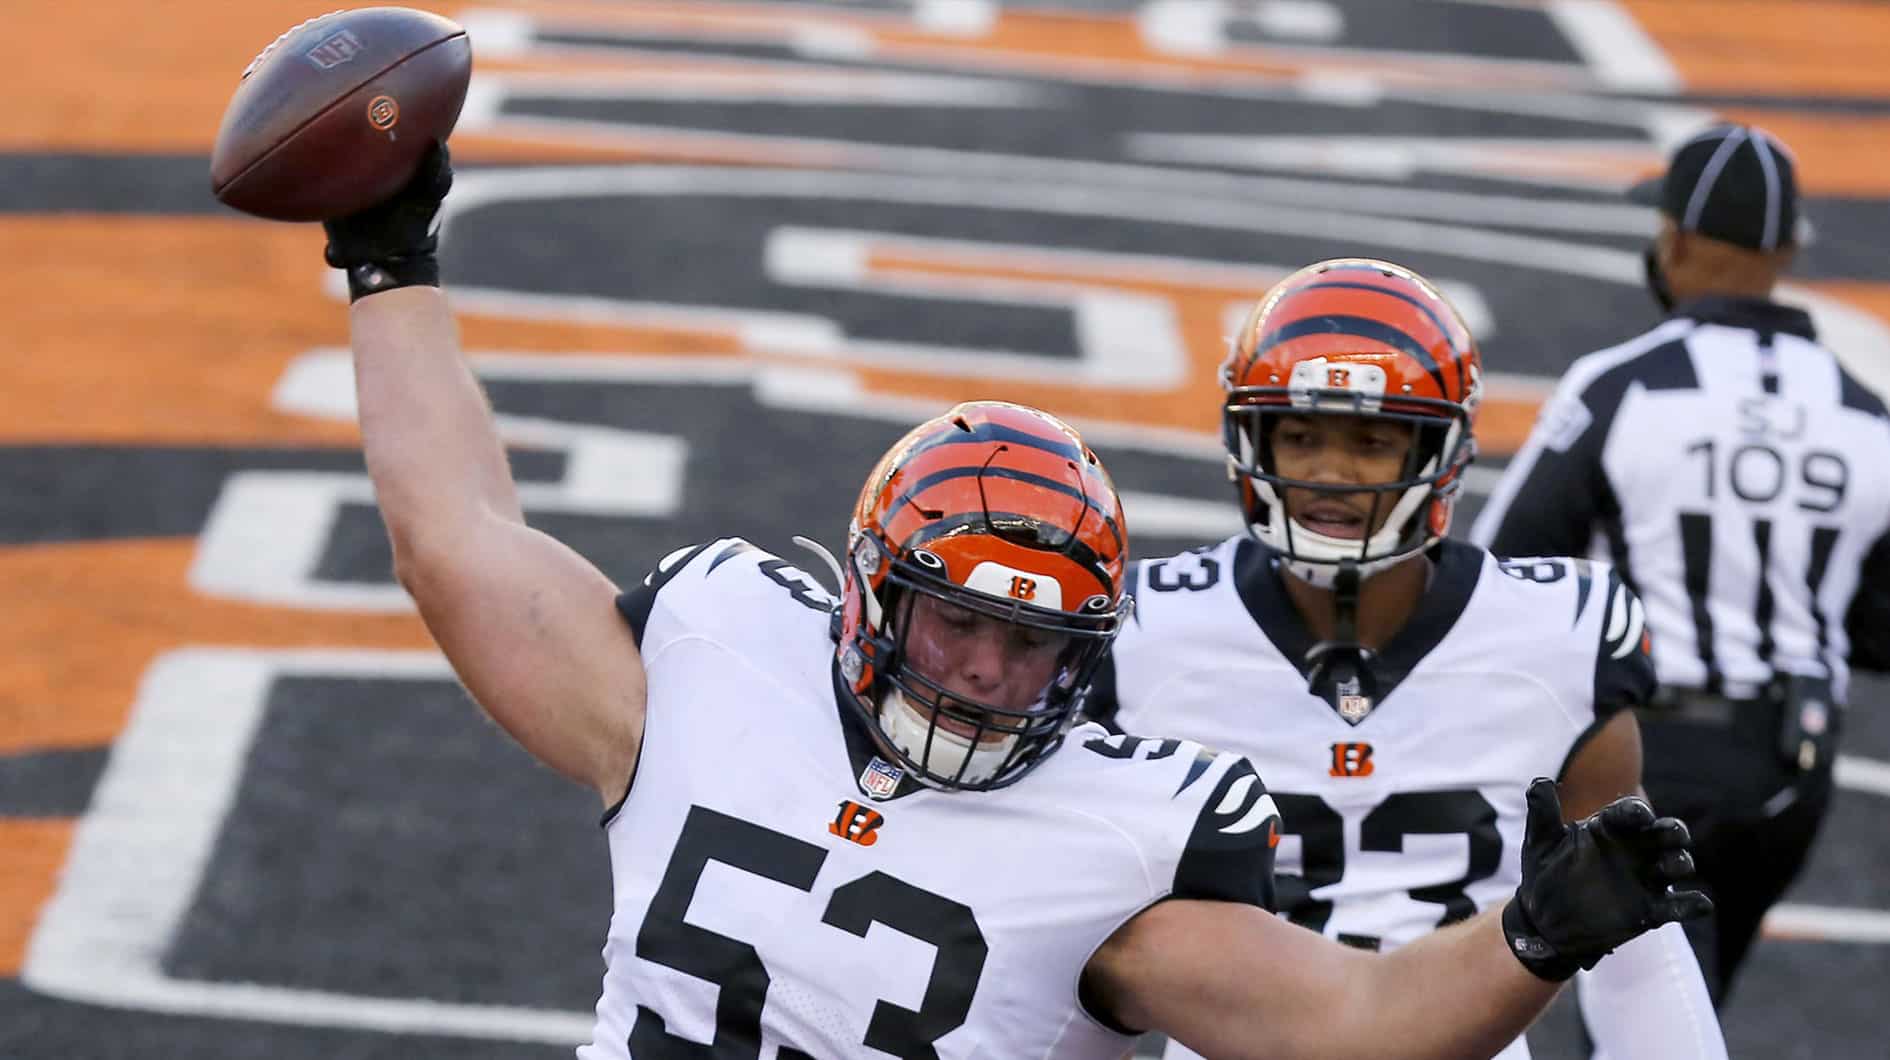 Cincinnati Bengals center Billy Price (53) spikes the football after a touchdown by running back Giovani Bernard (not pictured) against the Tennessee Titans during the fourth quarter at Paul Brown Stadium.